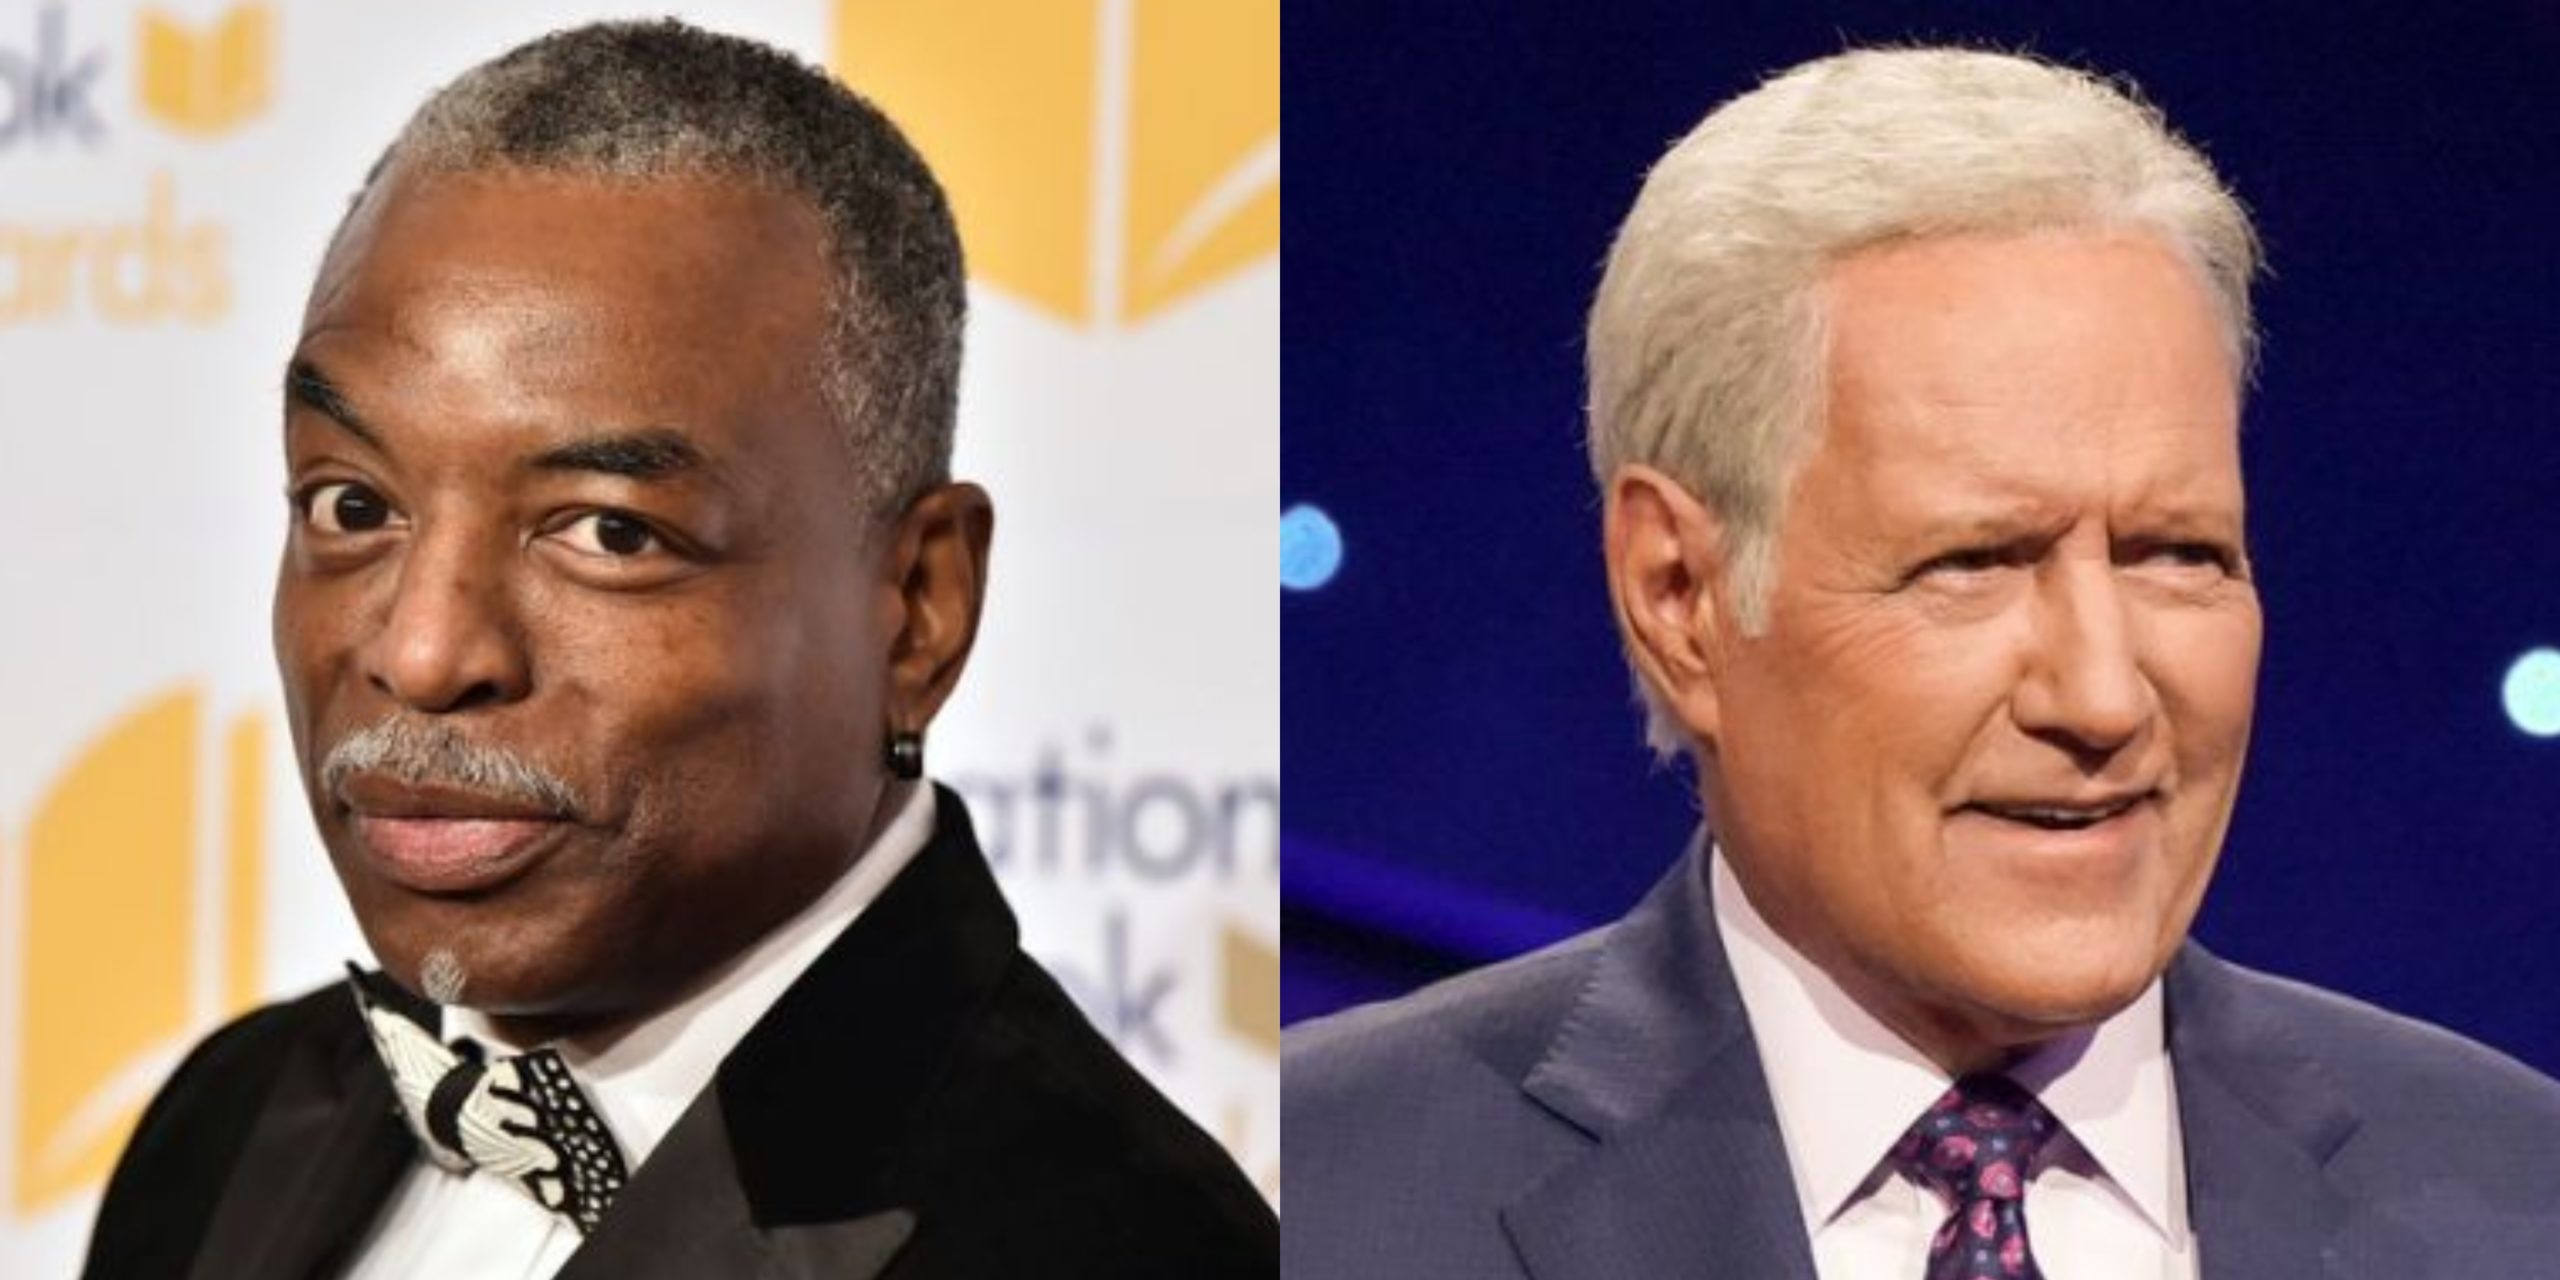 Roots & Star Trek Star LeVar Burton 'Flattered' By Petition To Become New Jeopardy! Host